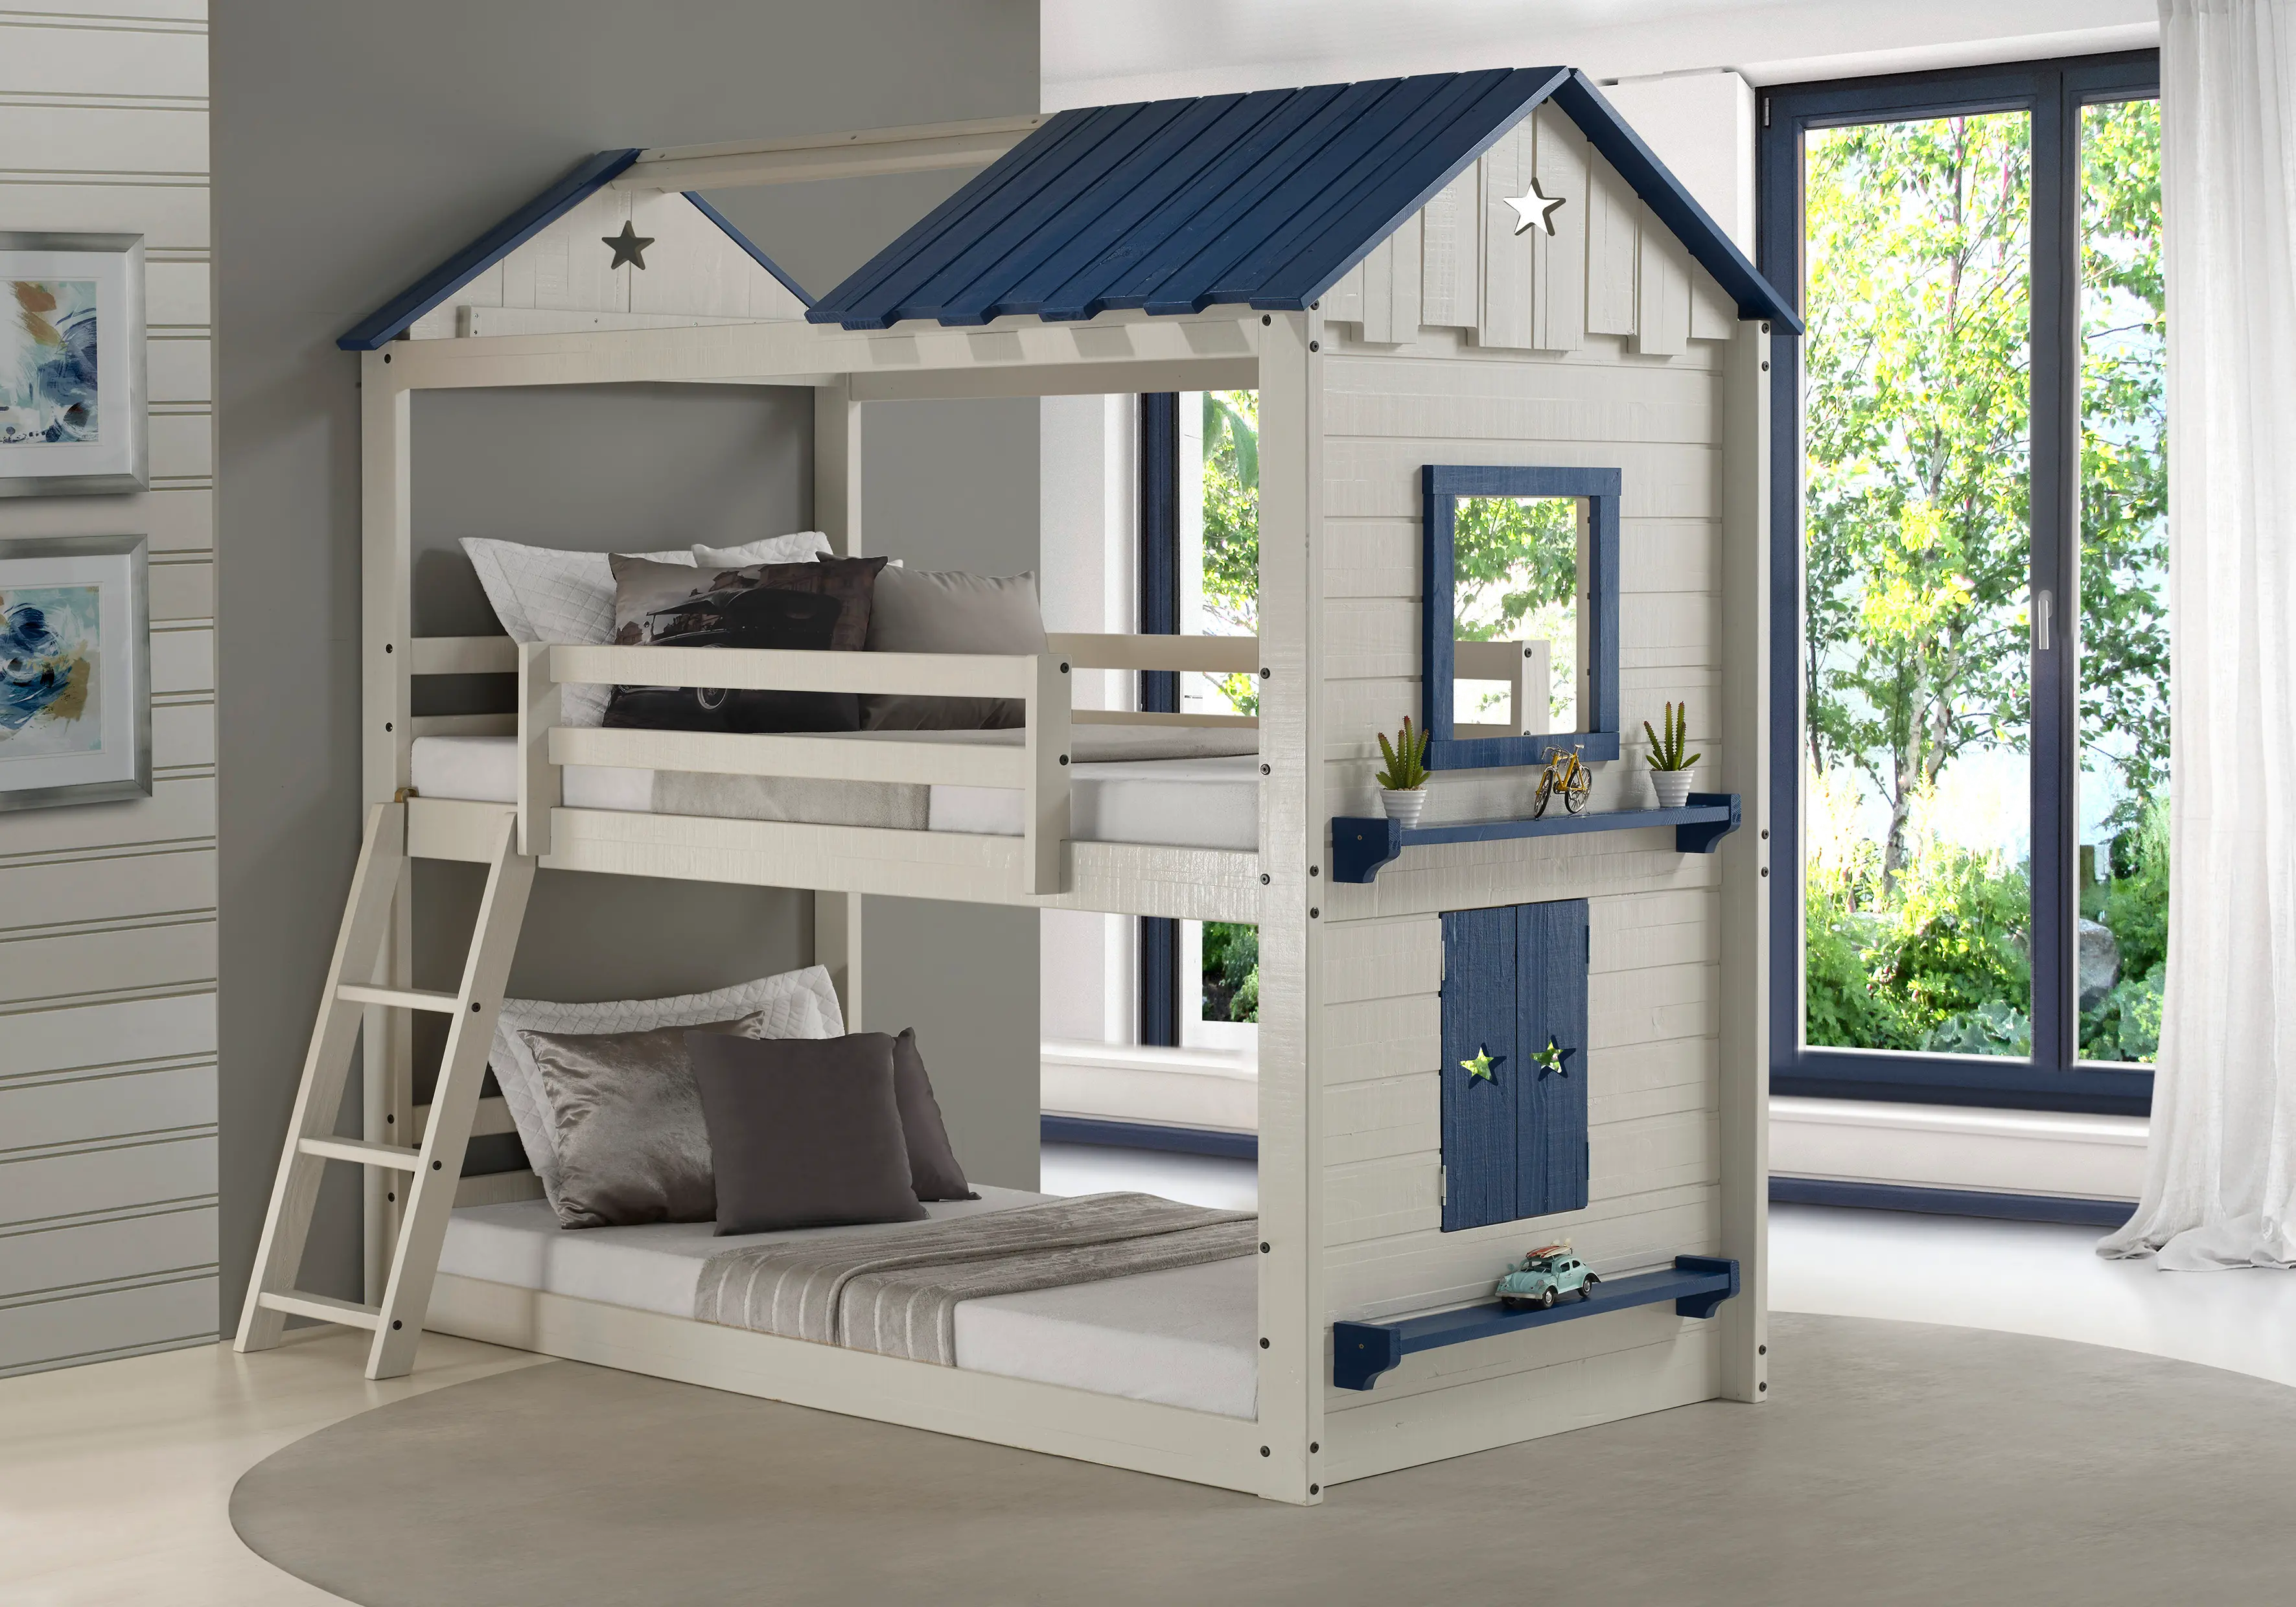 Photos - Bed Donco Trading White and Blue Twin-over-Twin Bunk  - Star Gaze 1580-TTLG